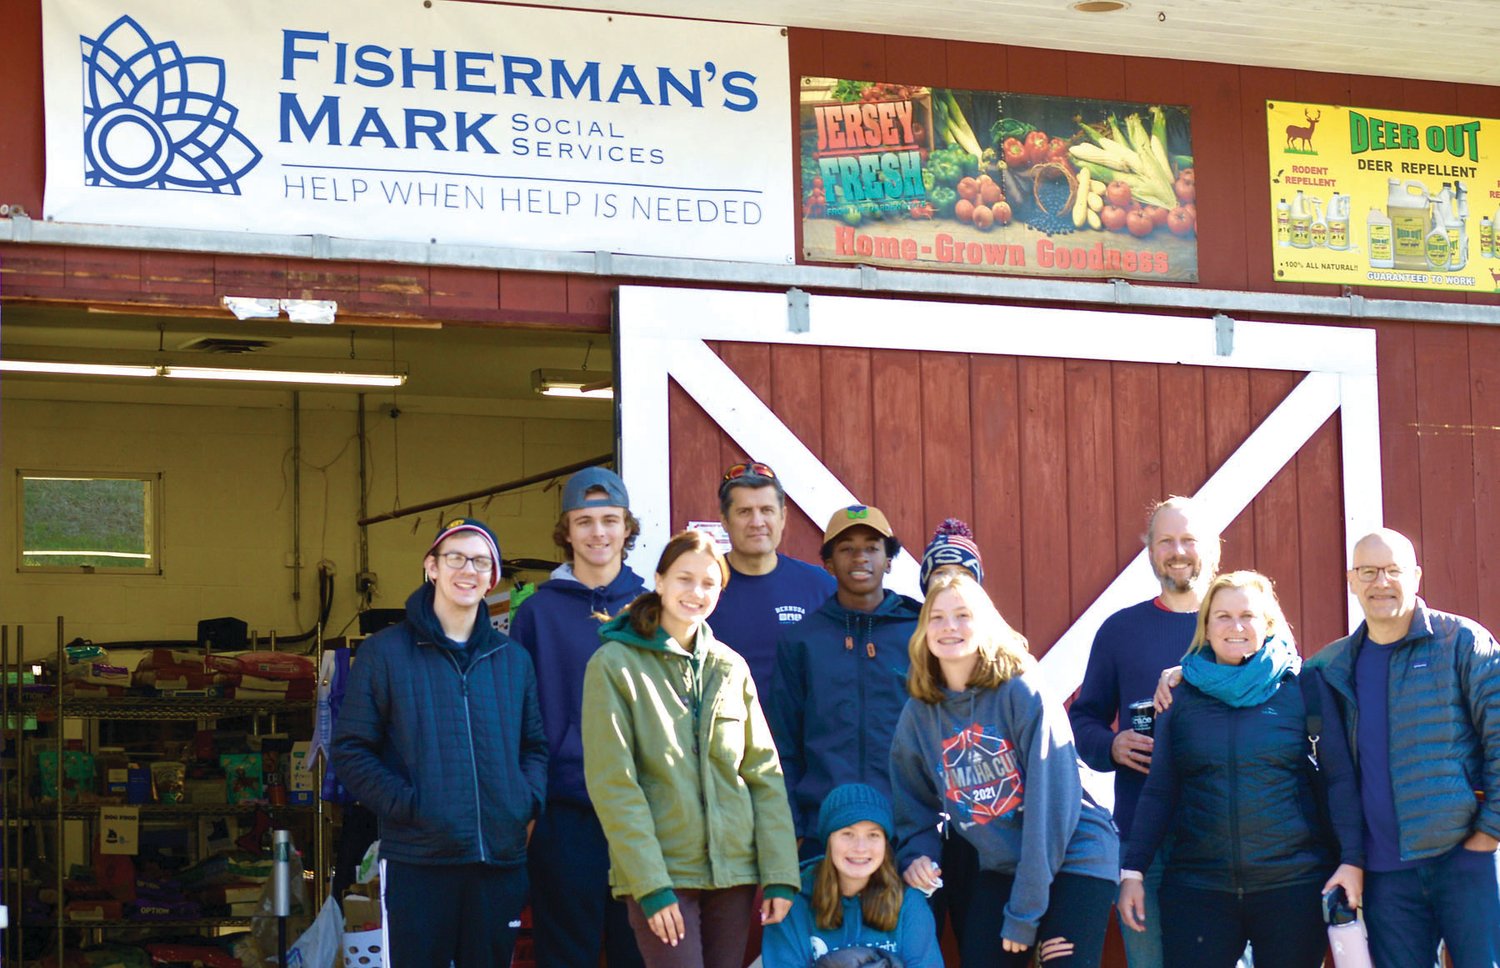 Fisherman’s Mark is among the organizations Thompson Memorial Presbyterian Church plans to partner with on Martin Luther King Day. Shown are participants from the church who took part in a community service project last fall.